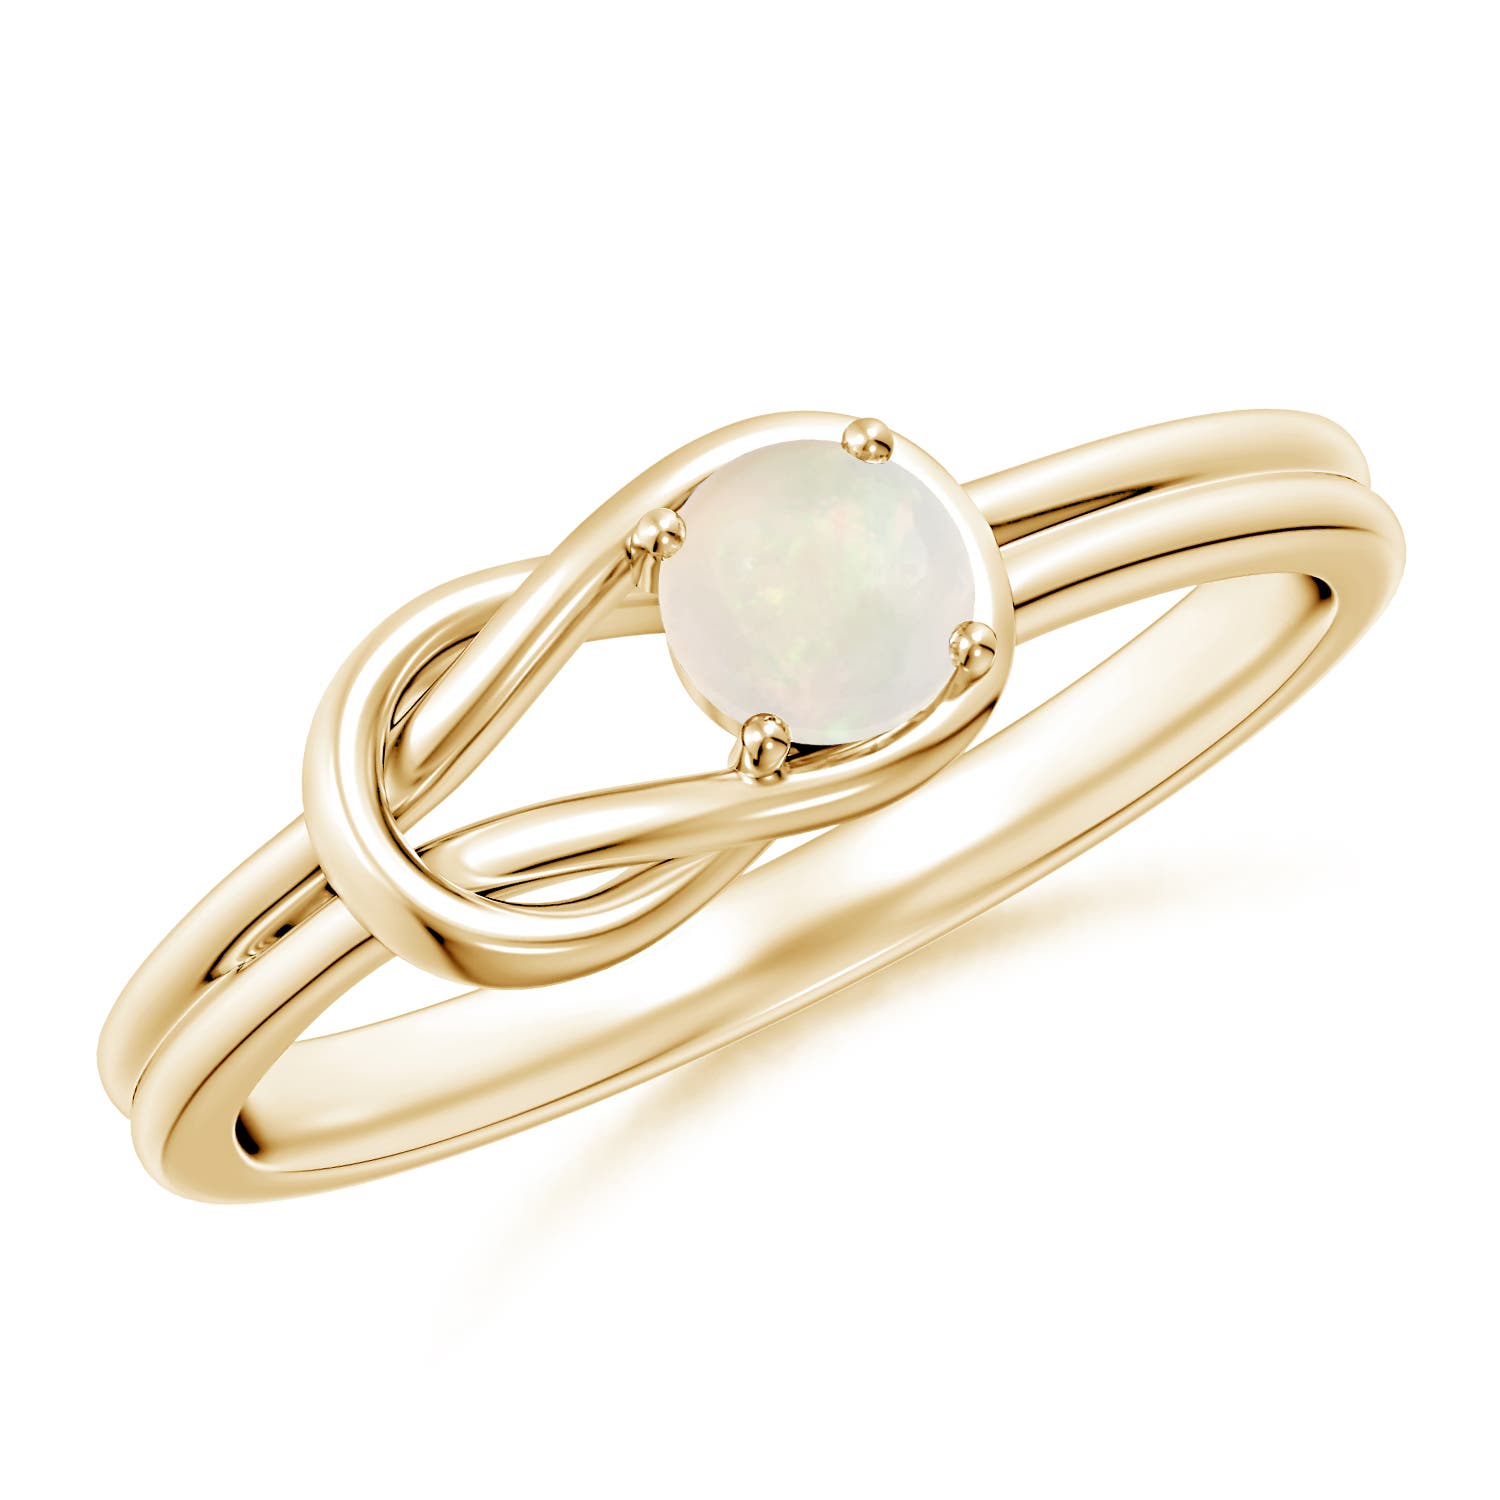 A - Opal / 0.16 CT / 14 KT Yellow Gold